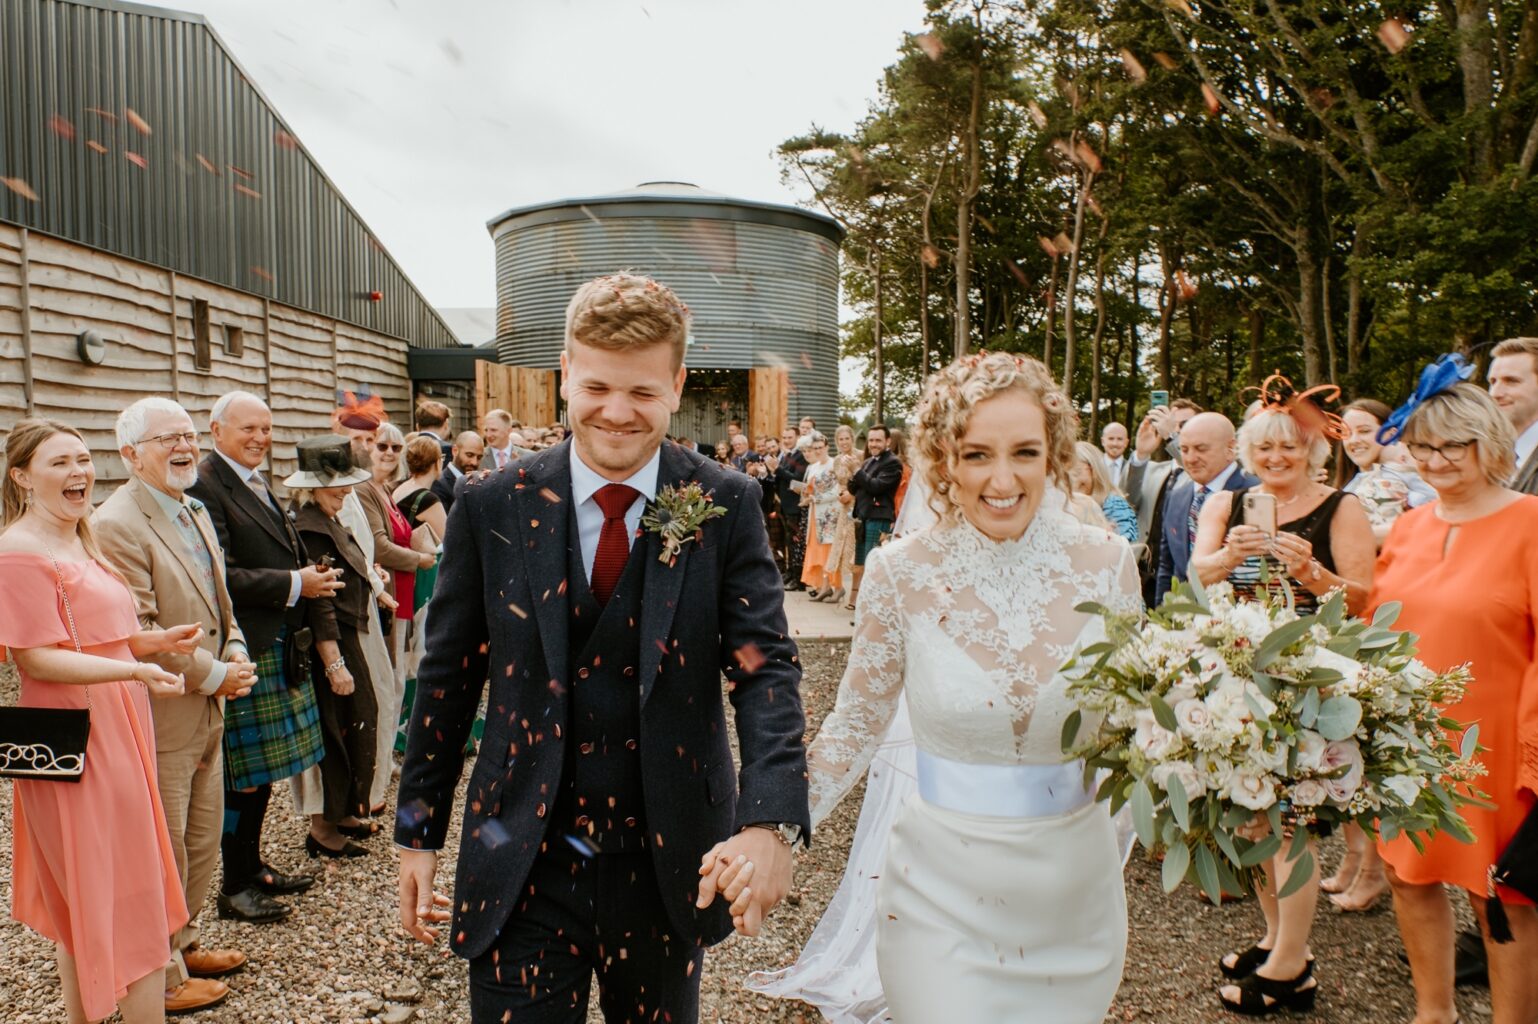 bride and groom walking towards camera as guests throw confetti at them as they walk out of barn wedding venue cairns farm estate wedding scotland